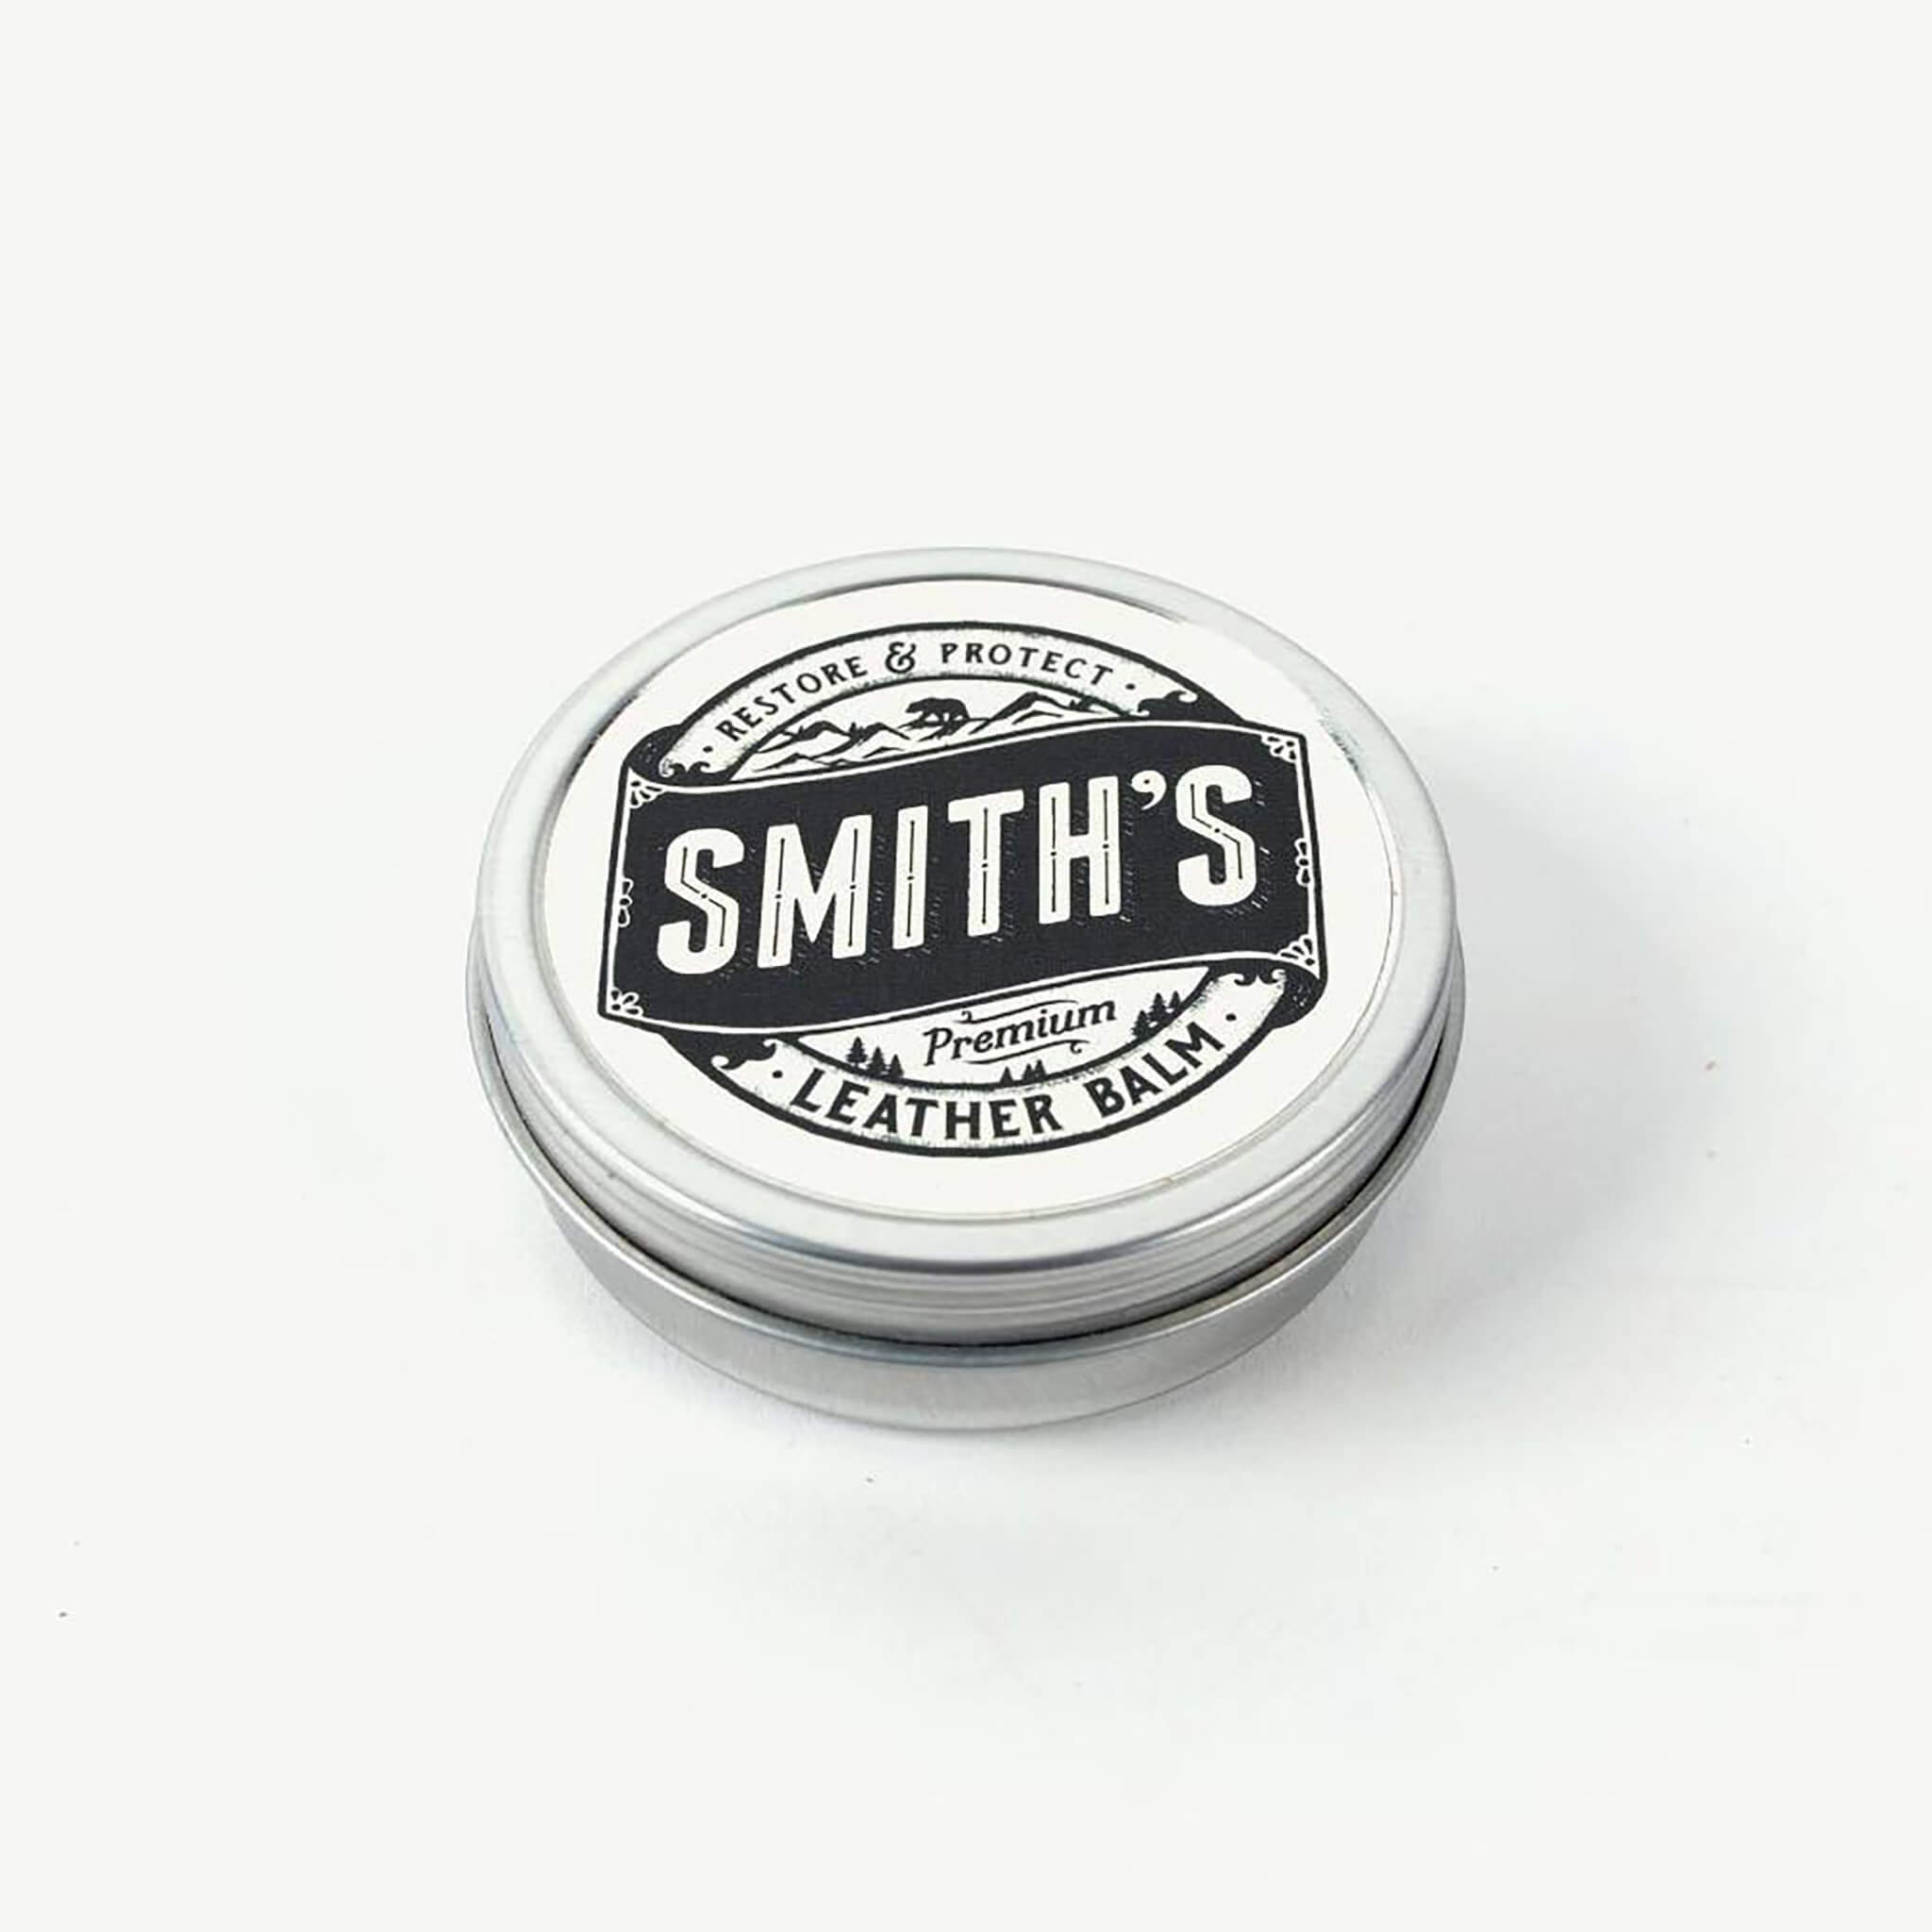 smiths restore and protect leather balm tin